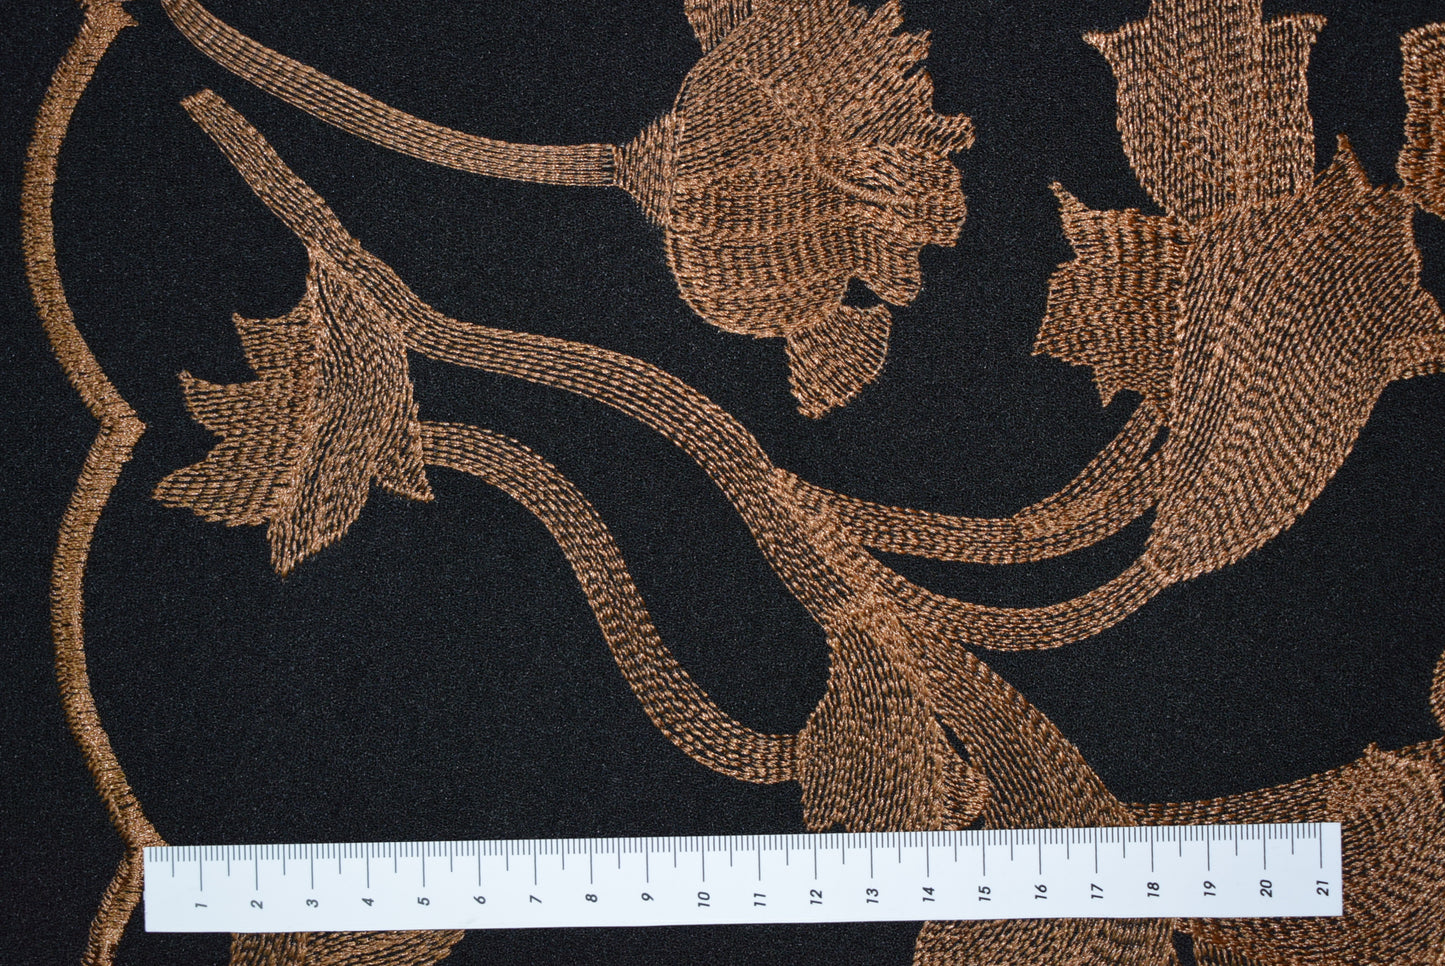 Copper Embroidery on Black Crepe